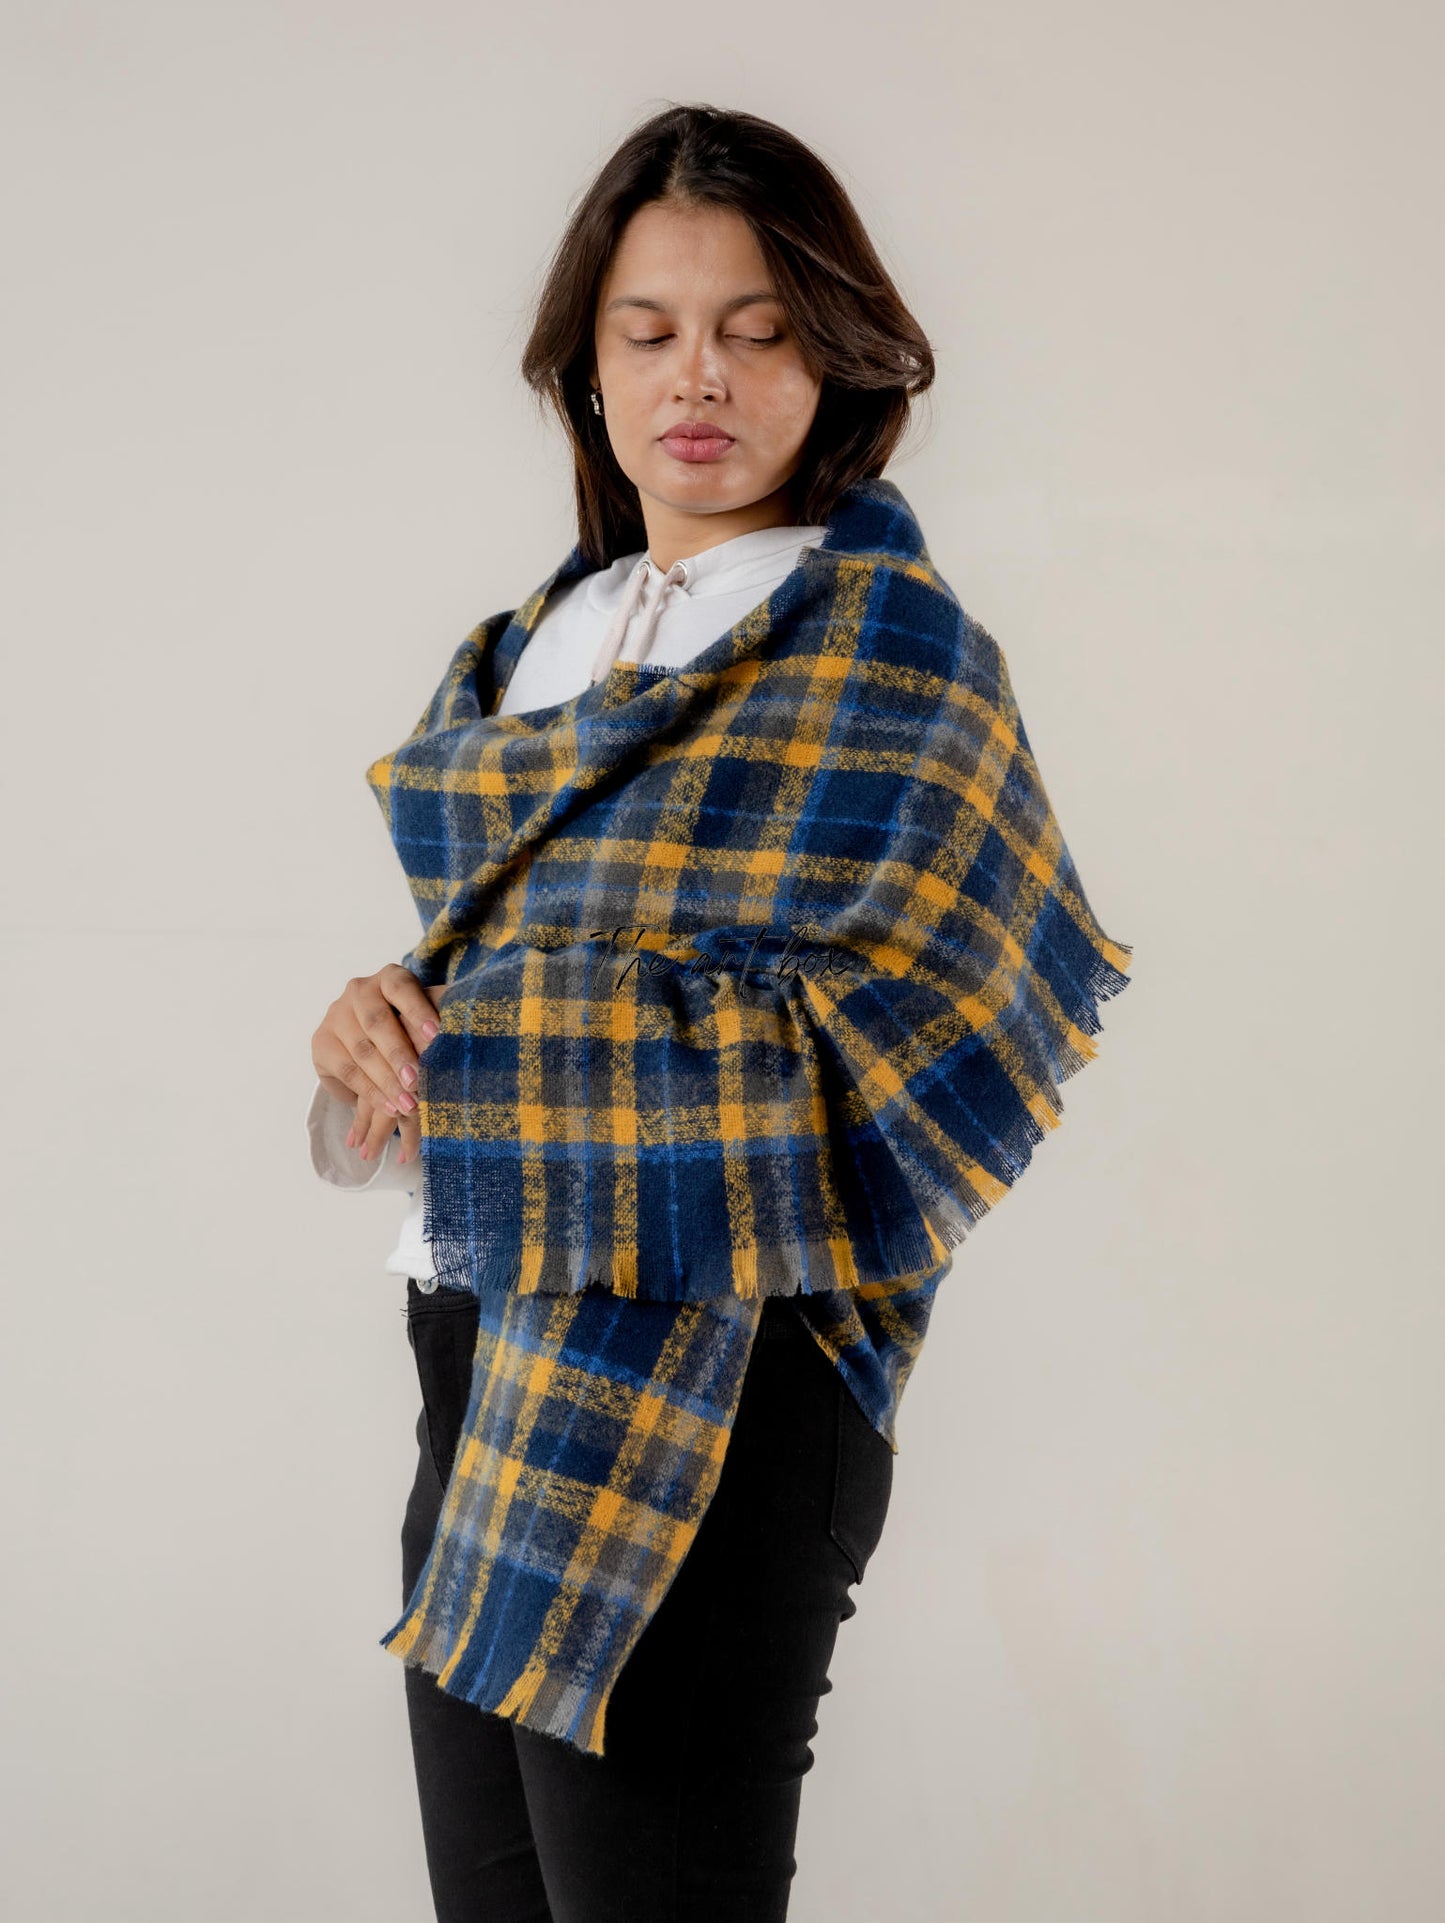 Cotton Comforts Stay Snug with Our Woolen Scarf Range